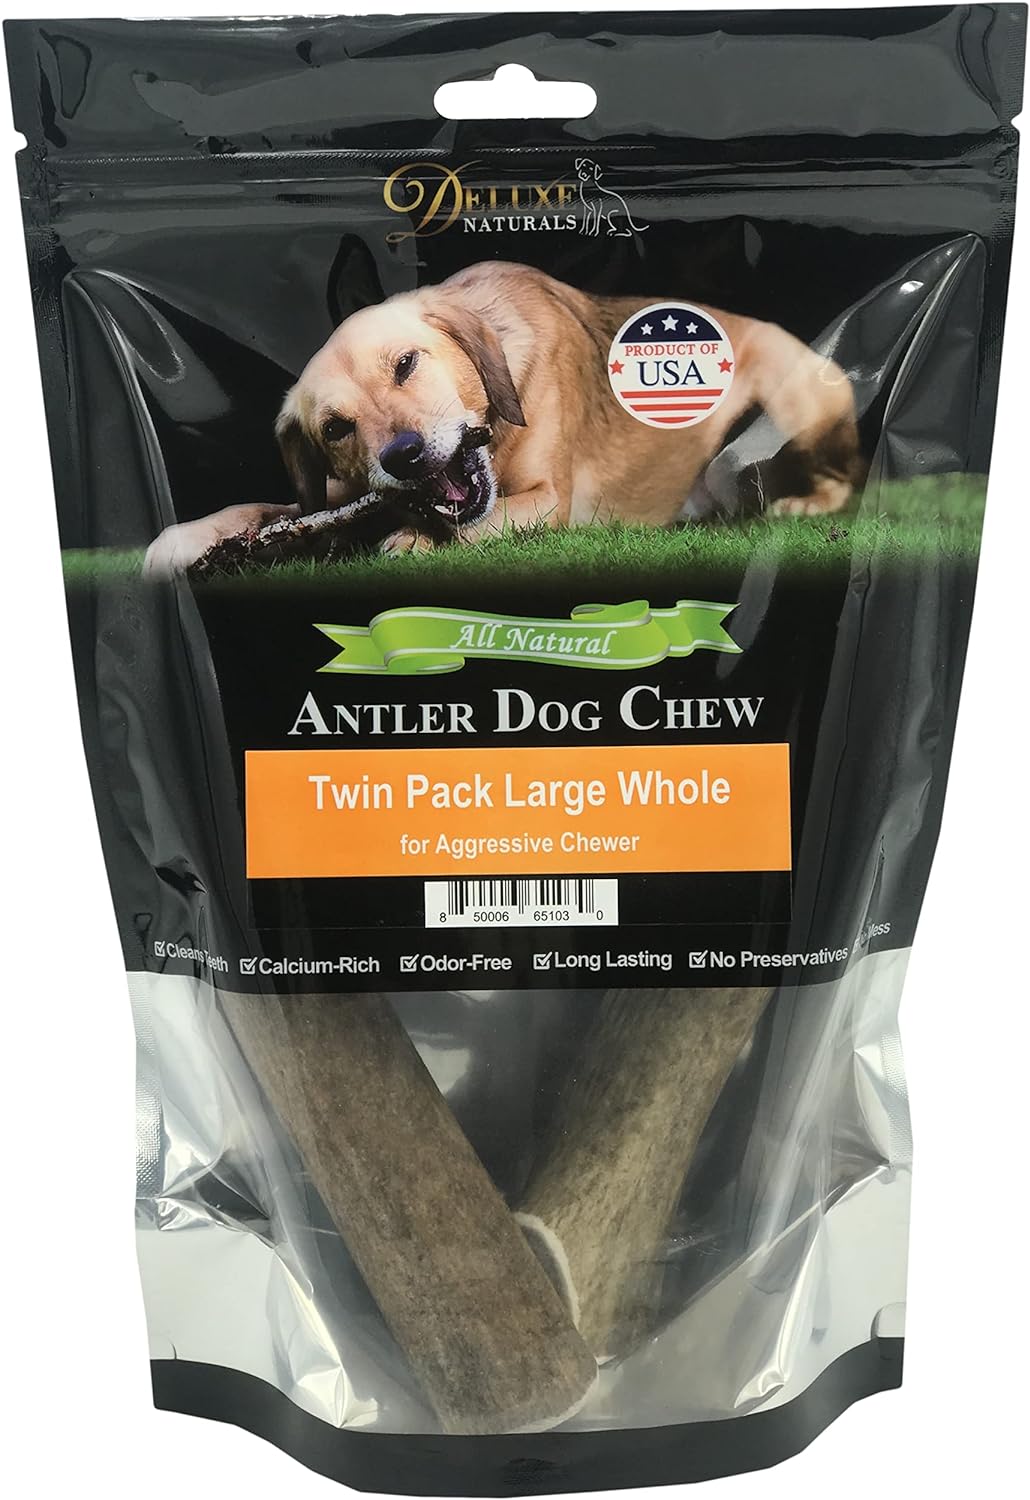 Deluxe Naturals Elk Antler Chews for Dogs | Naturally Shed USA Collected Elk Antlers | All Natural A-Grade Premium Elk Antler Dog Chews | Product of USA, Twin Pack Large Whole : Pet Supplies